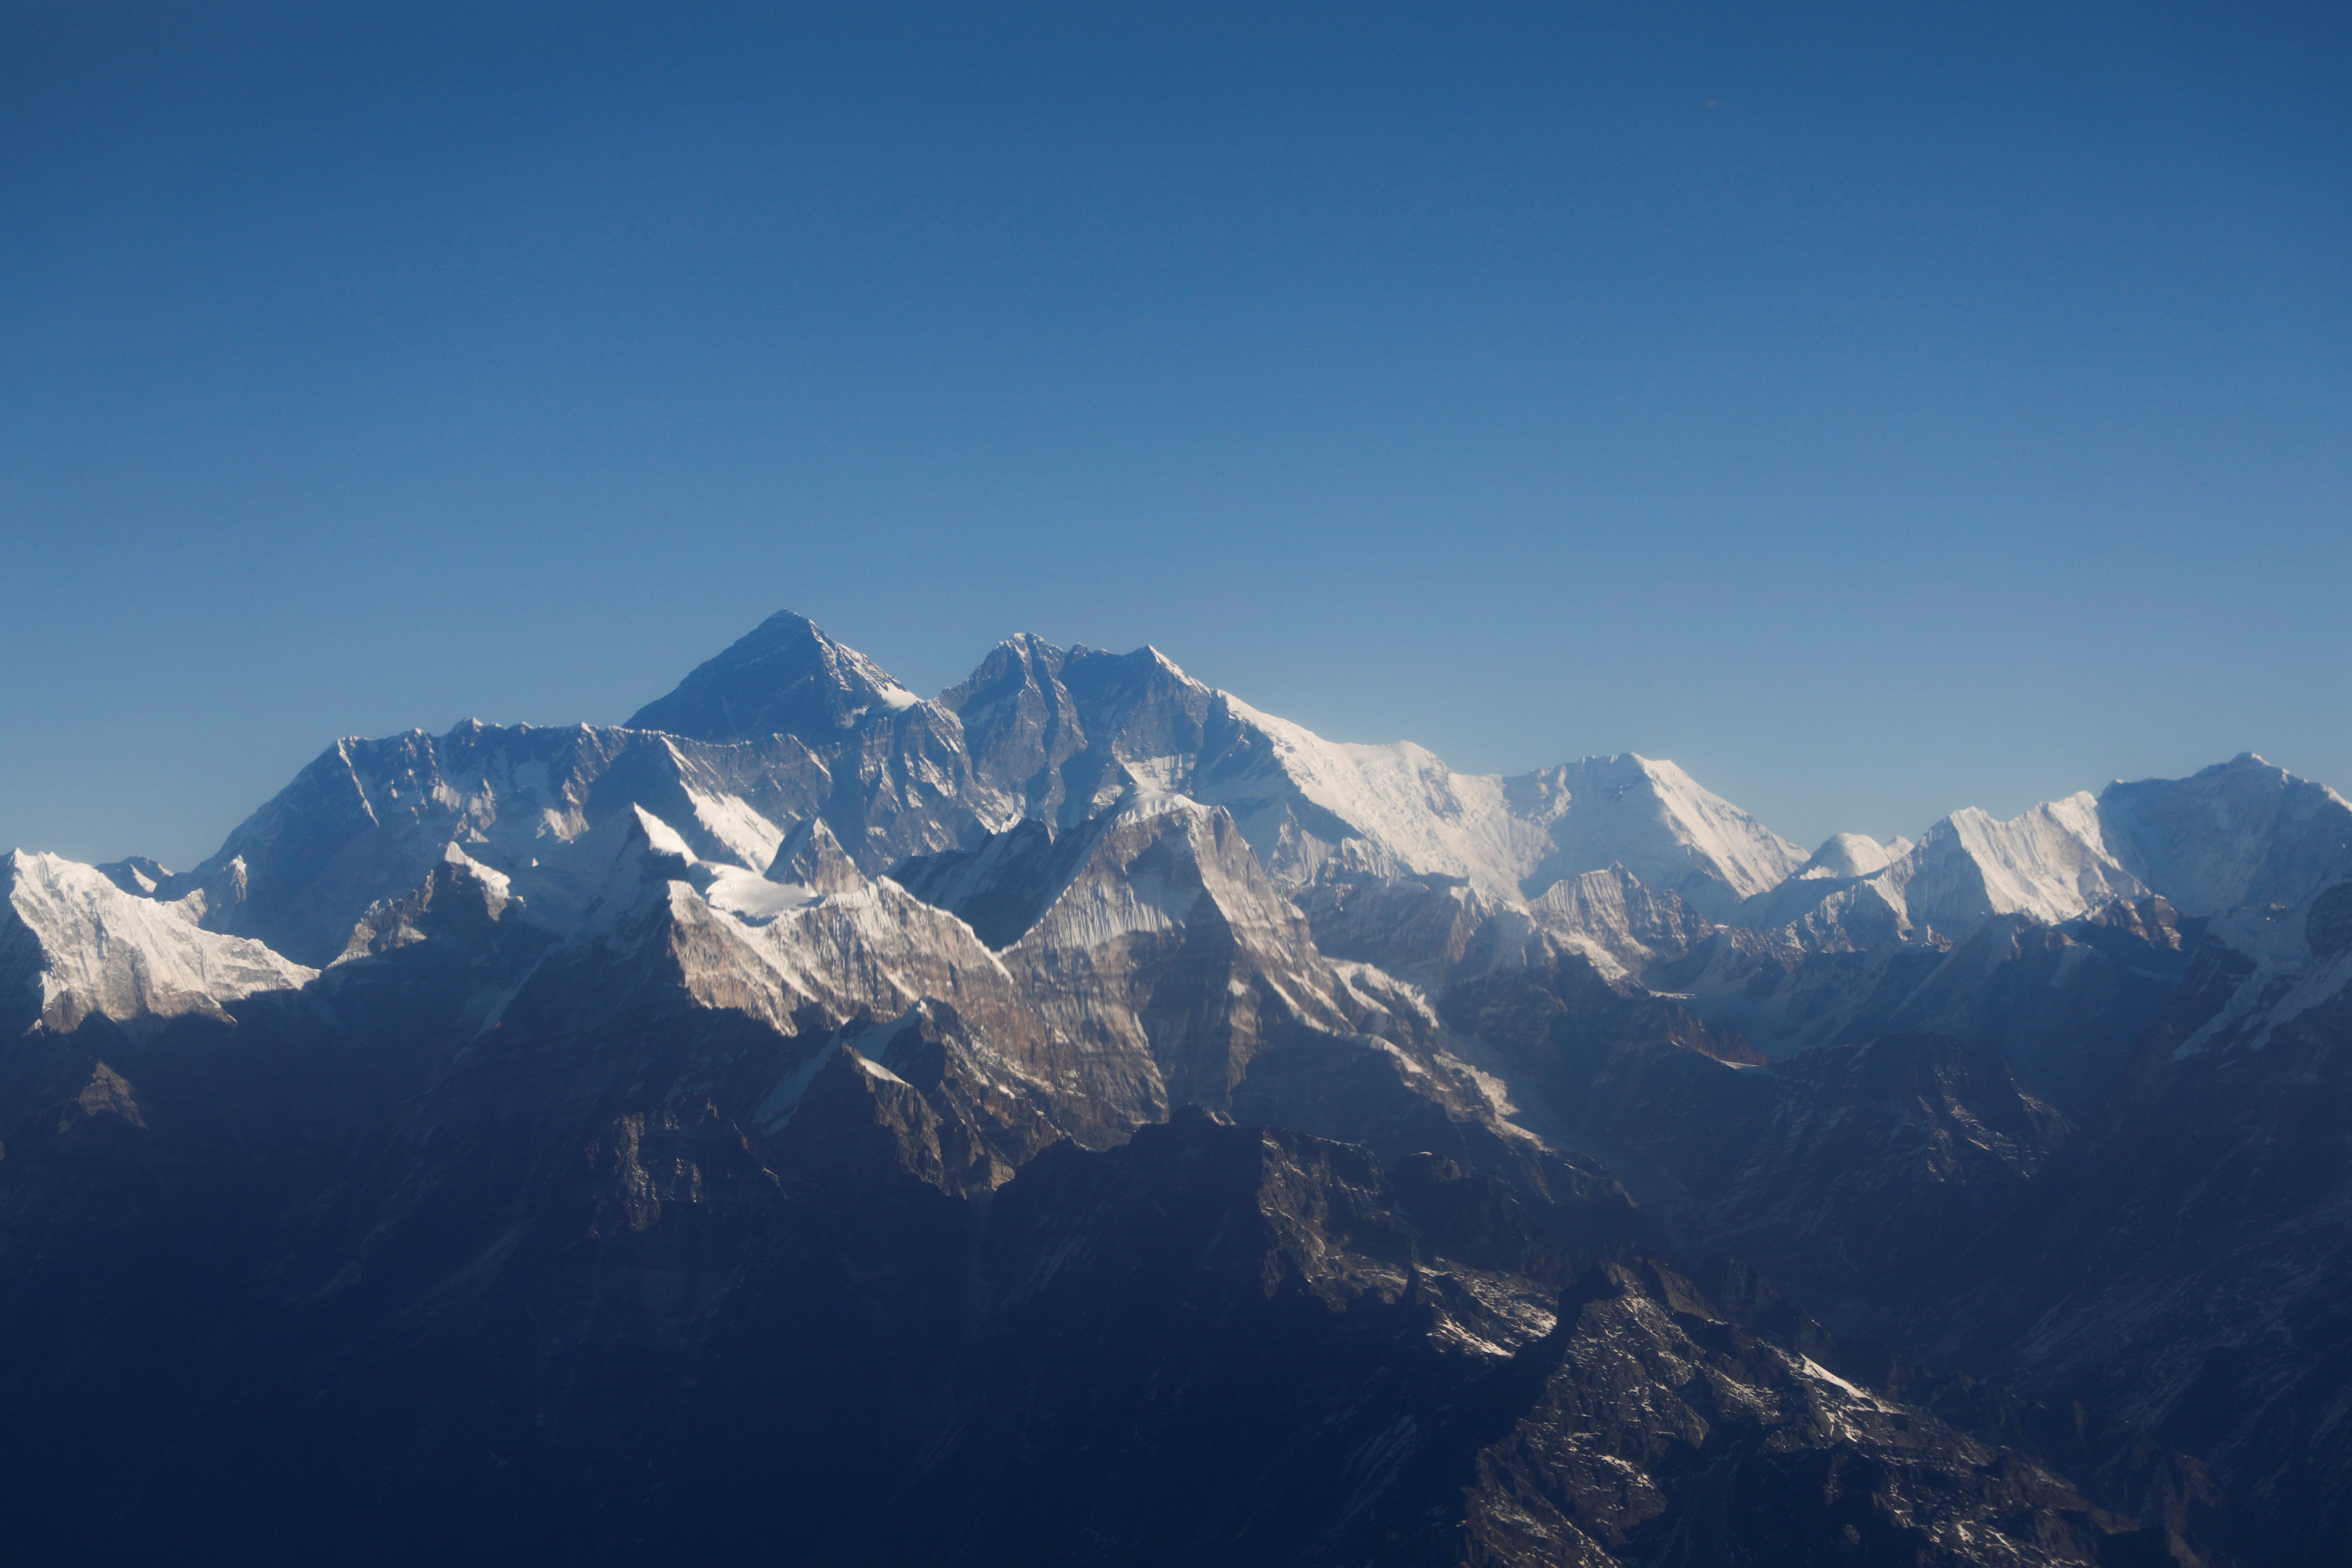 Mount Everest, the world's highest peak, and other peaks of the Himalayan range are seen through an aircraft window during a mountain flight from Kathmandu, January 15, 2020 (by Reuters/Monika Deupala)